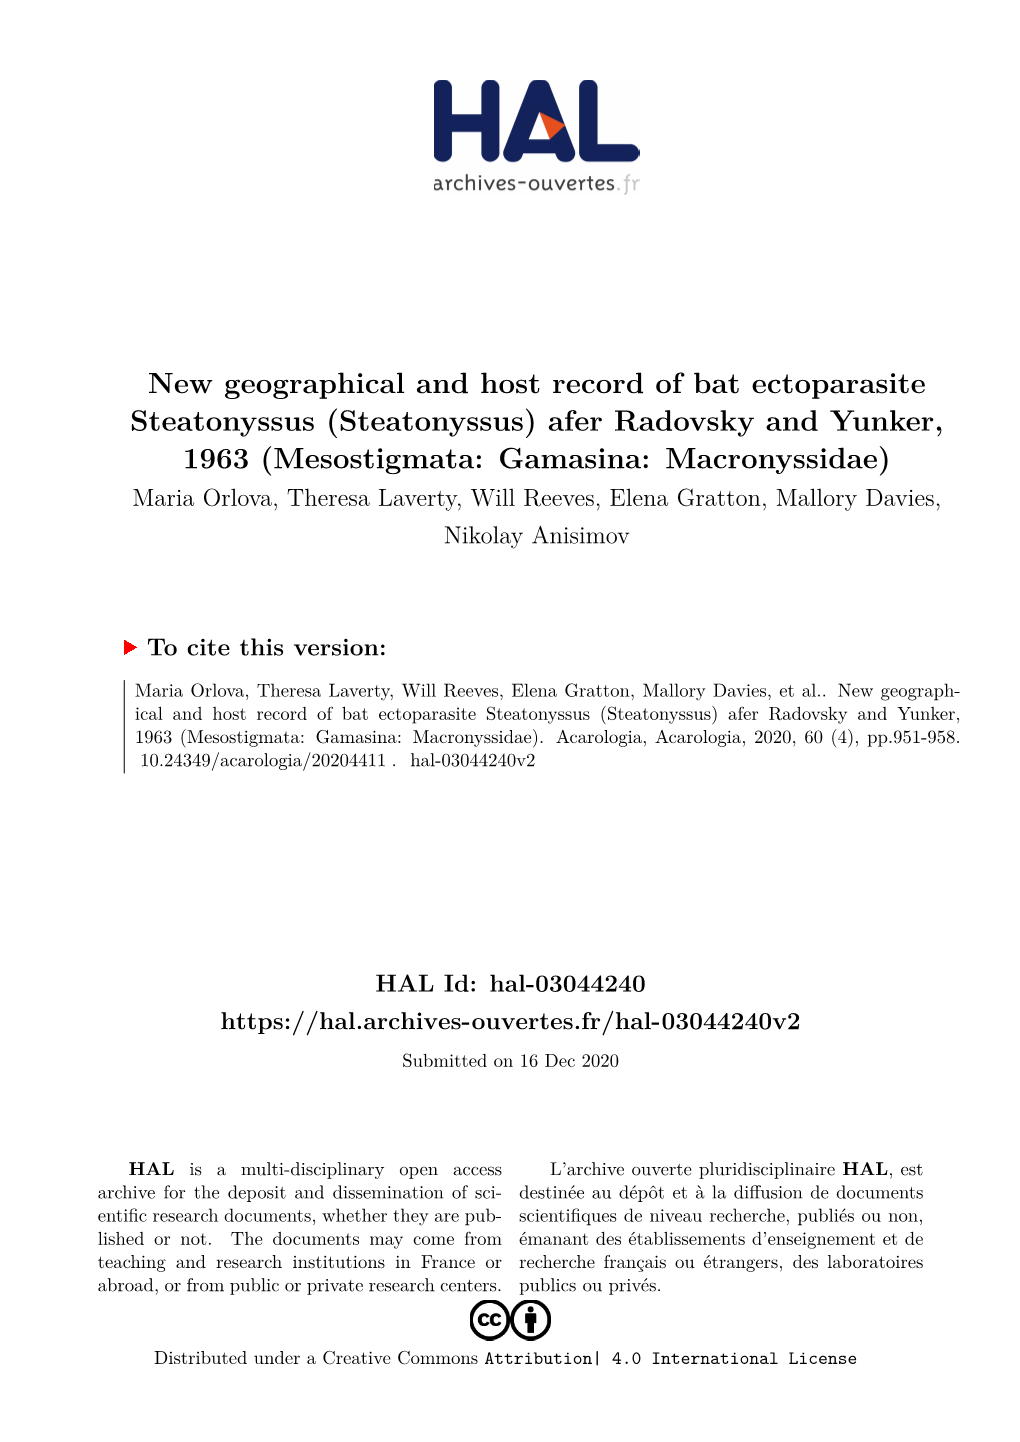 New Geographical and Host Record of Bat Ectoparasite Steatonyssus